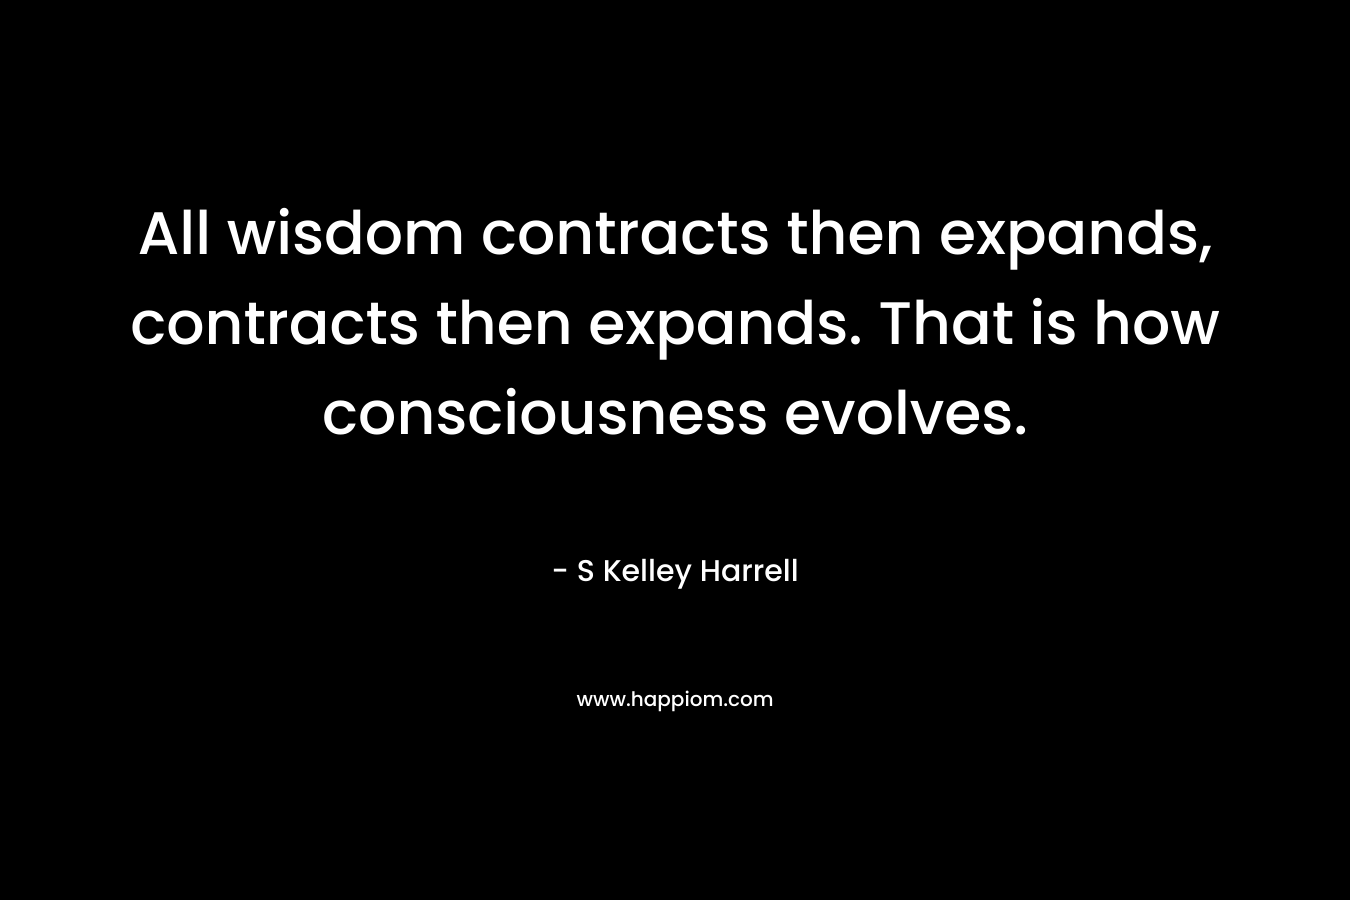 All wisdom contracts then expands, contracts then expands. That is how consciousness evolves.